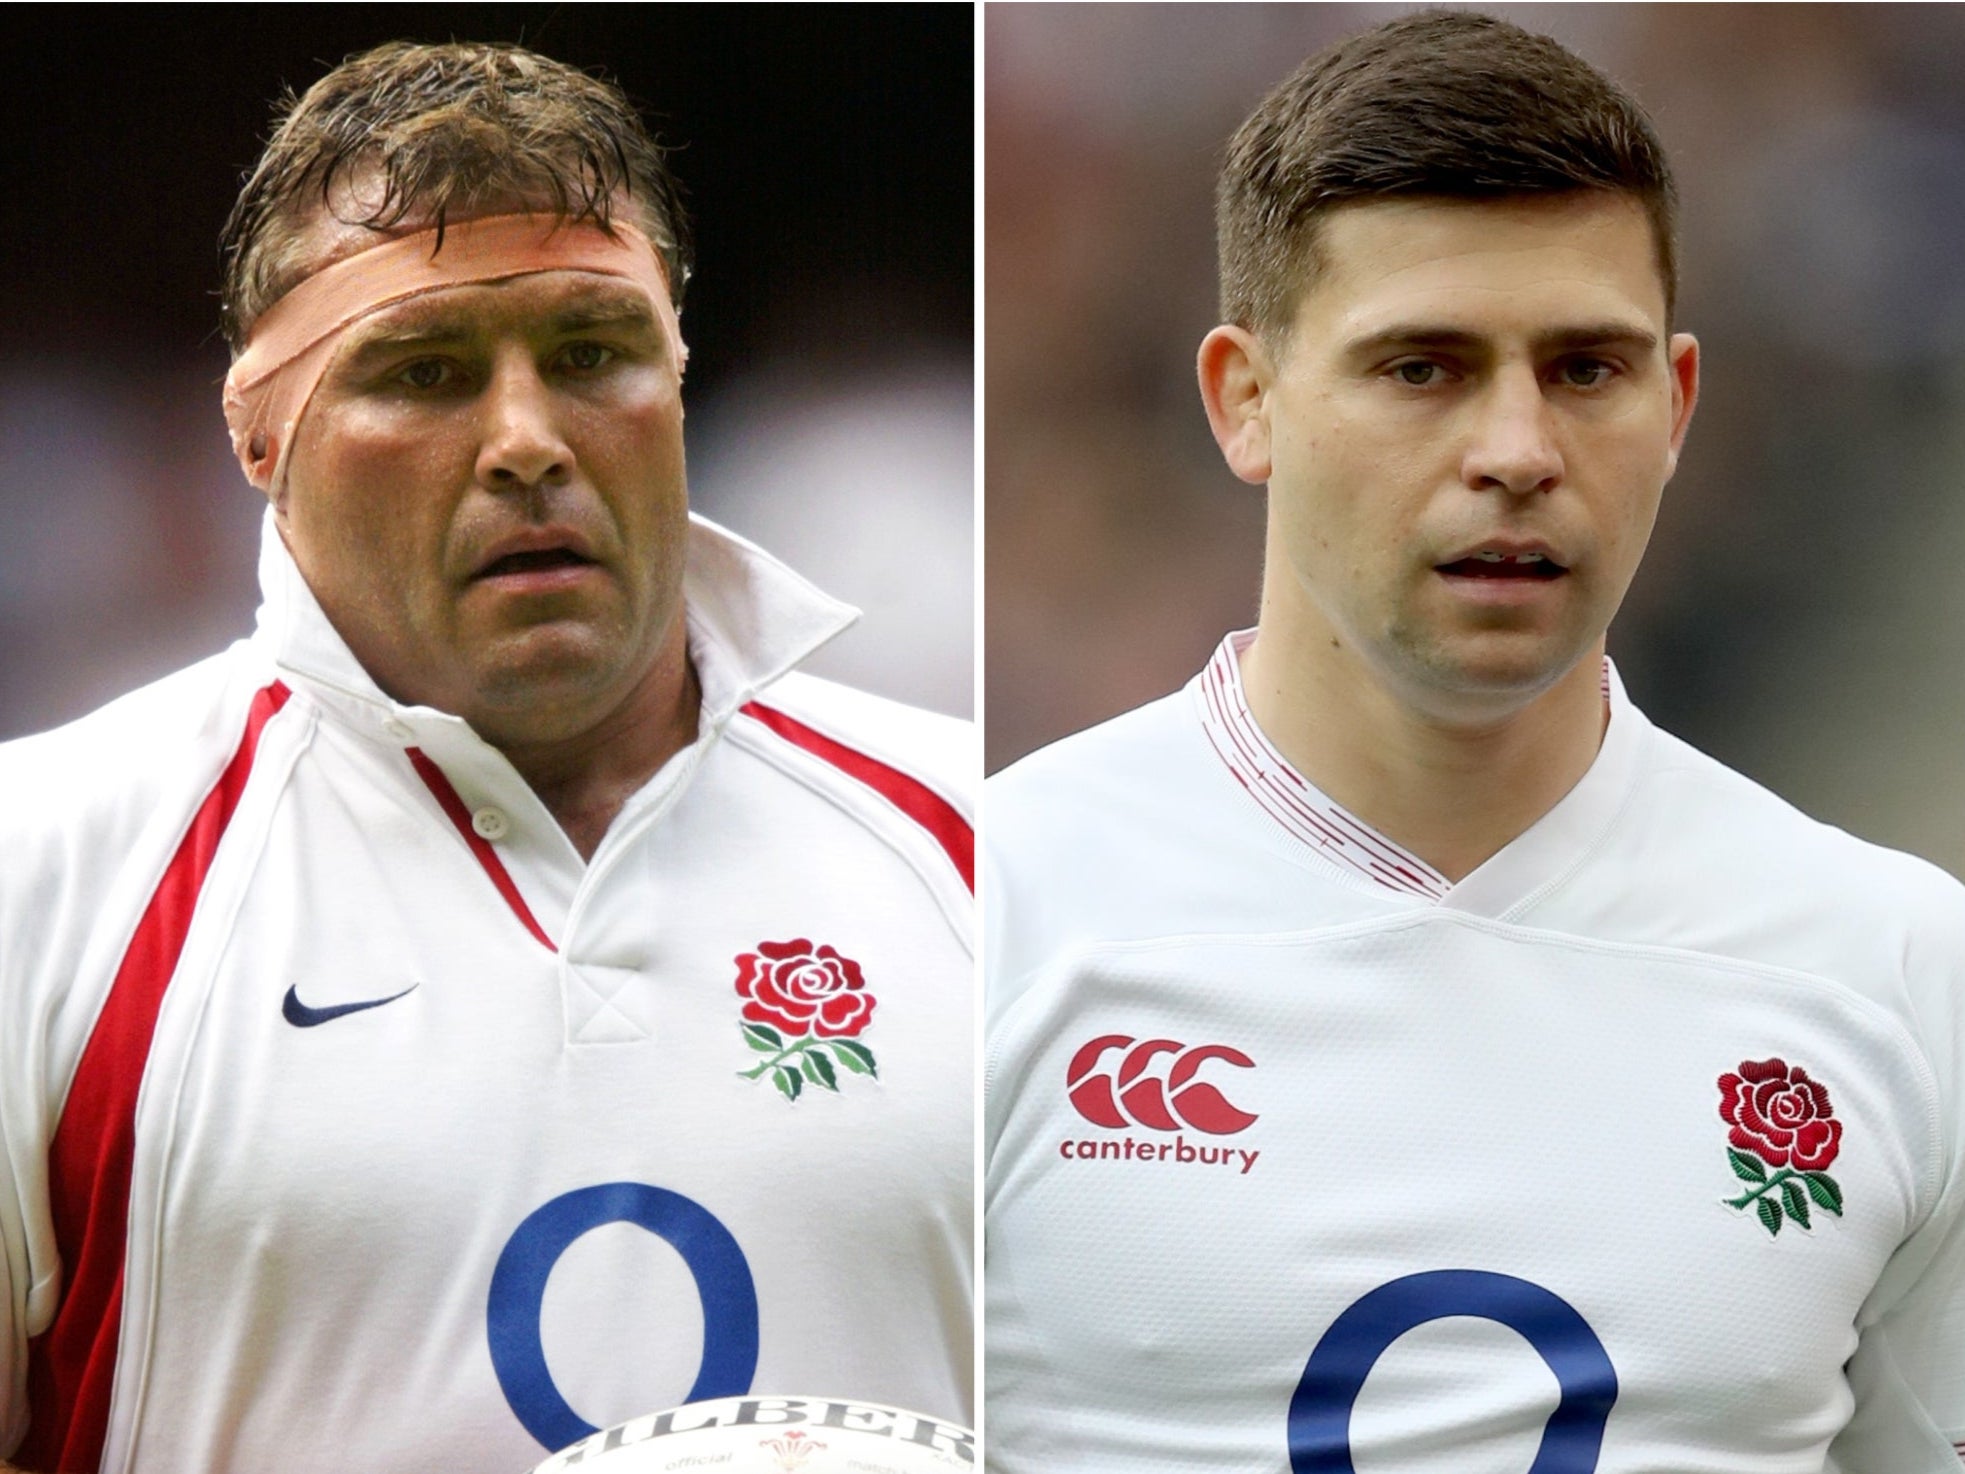 Ben Youngs, right, is poised to replace Jason Leonard as England’s most capped player